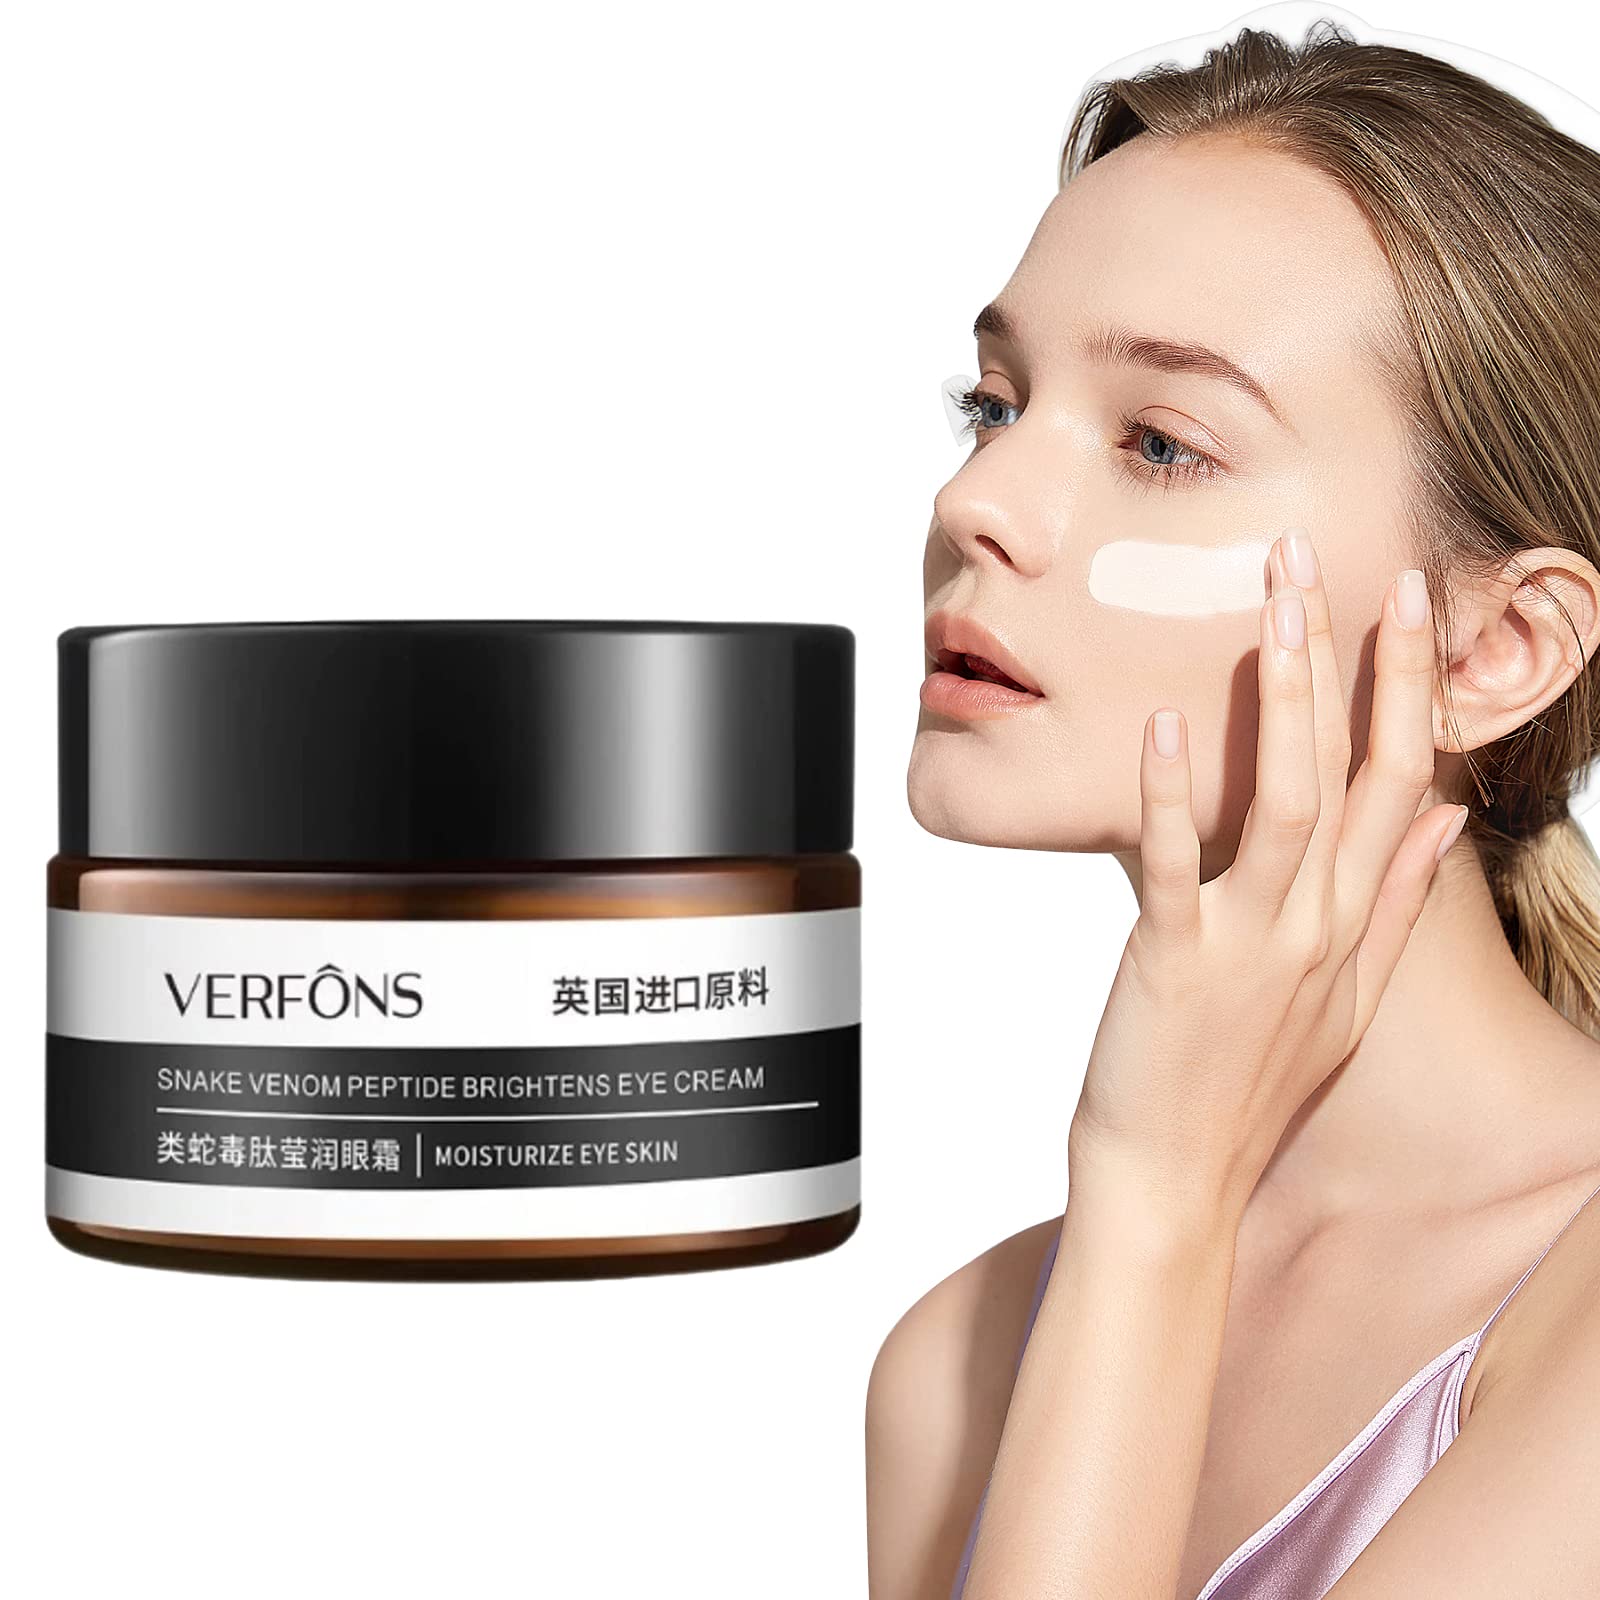 Verfons Firming Eye Cream,Verfons Snake Venom Firming Eye Cream, Verfons Temporary Firming Eye Cream for Bags, Anti Aging Eye Bag Cream, Instant Remove Eye Bags Fades Fine Lines and Wrinkles-1pcs…